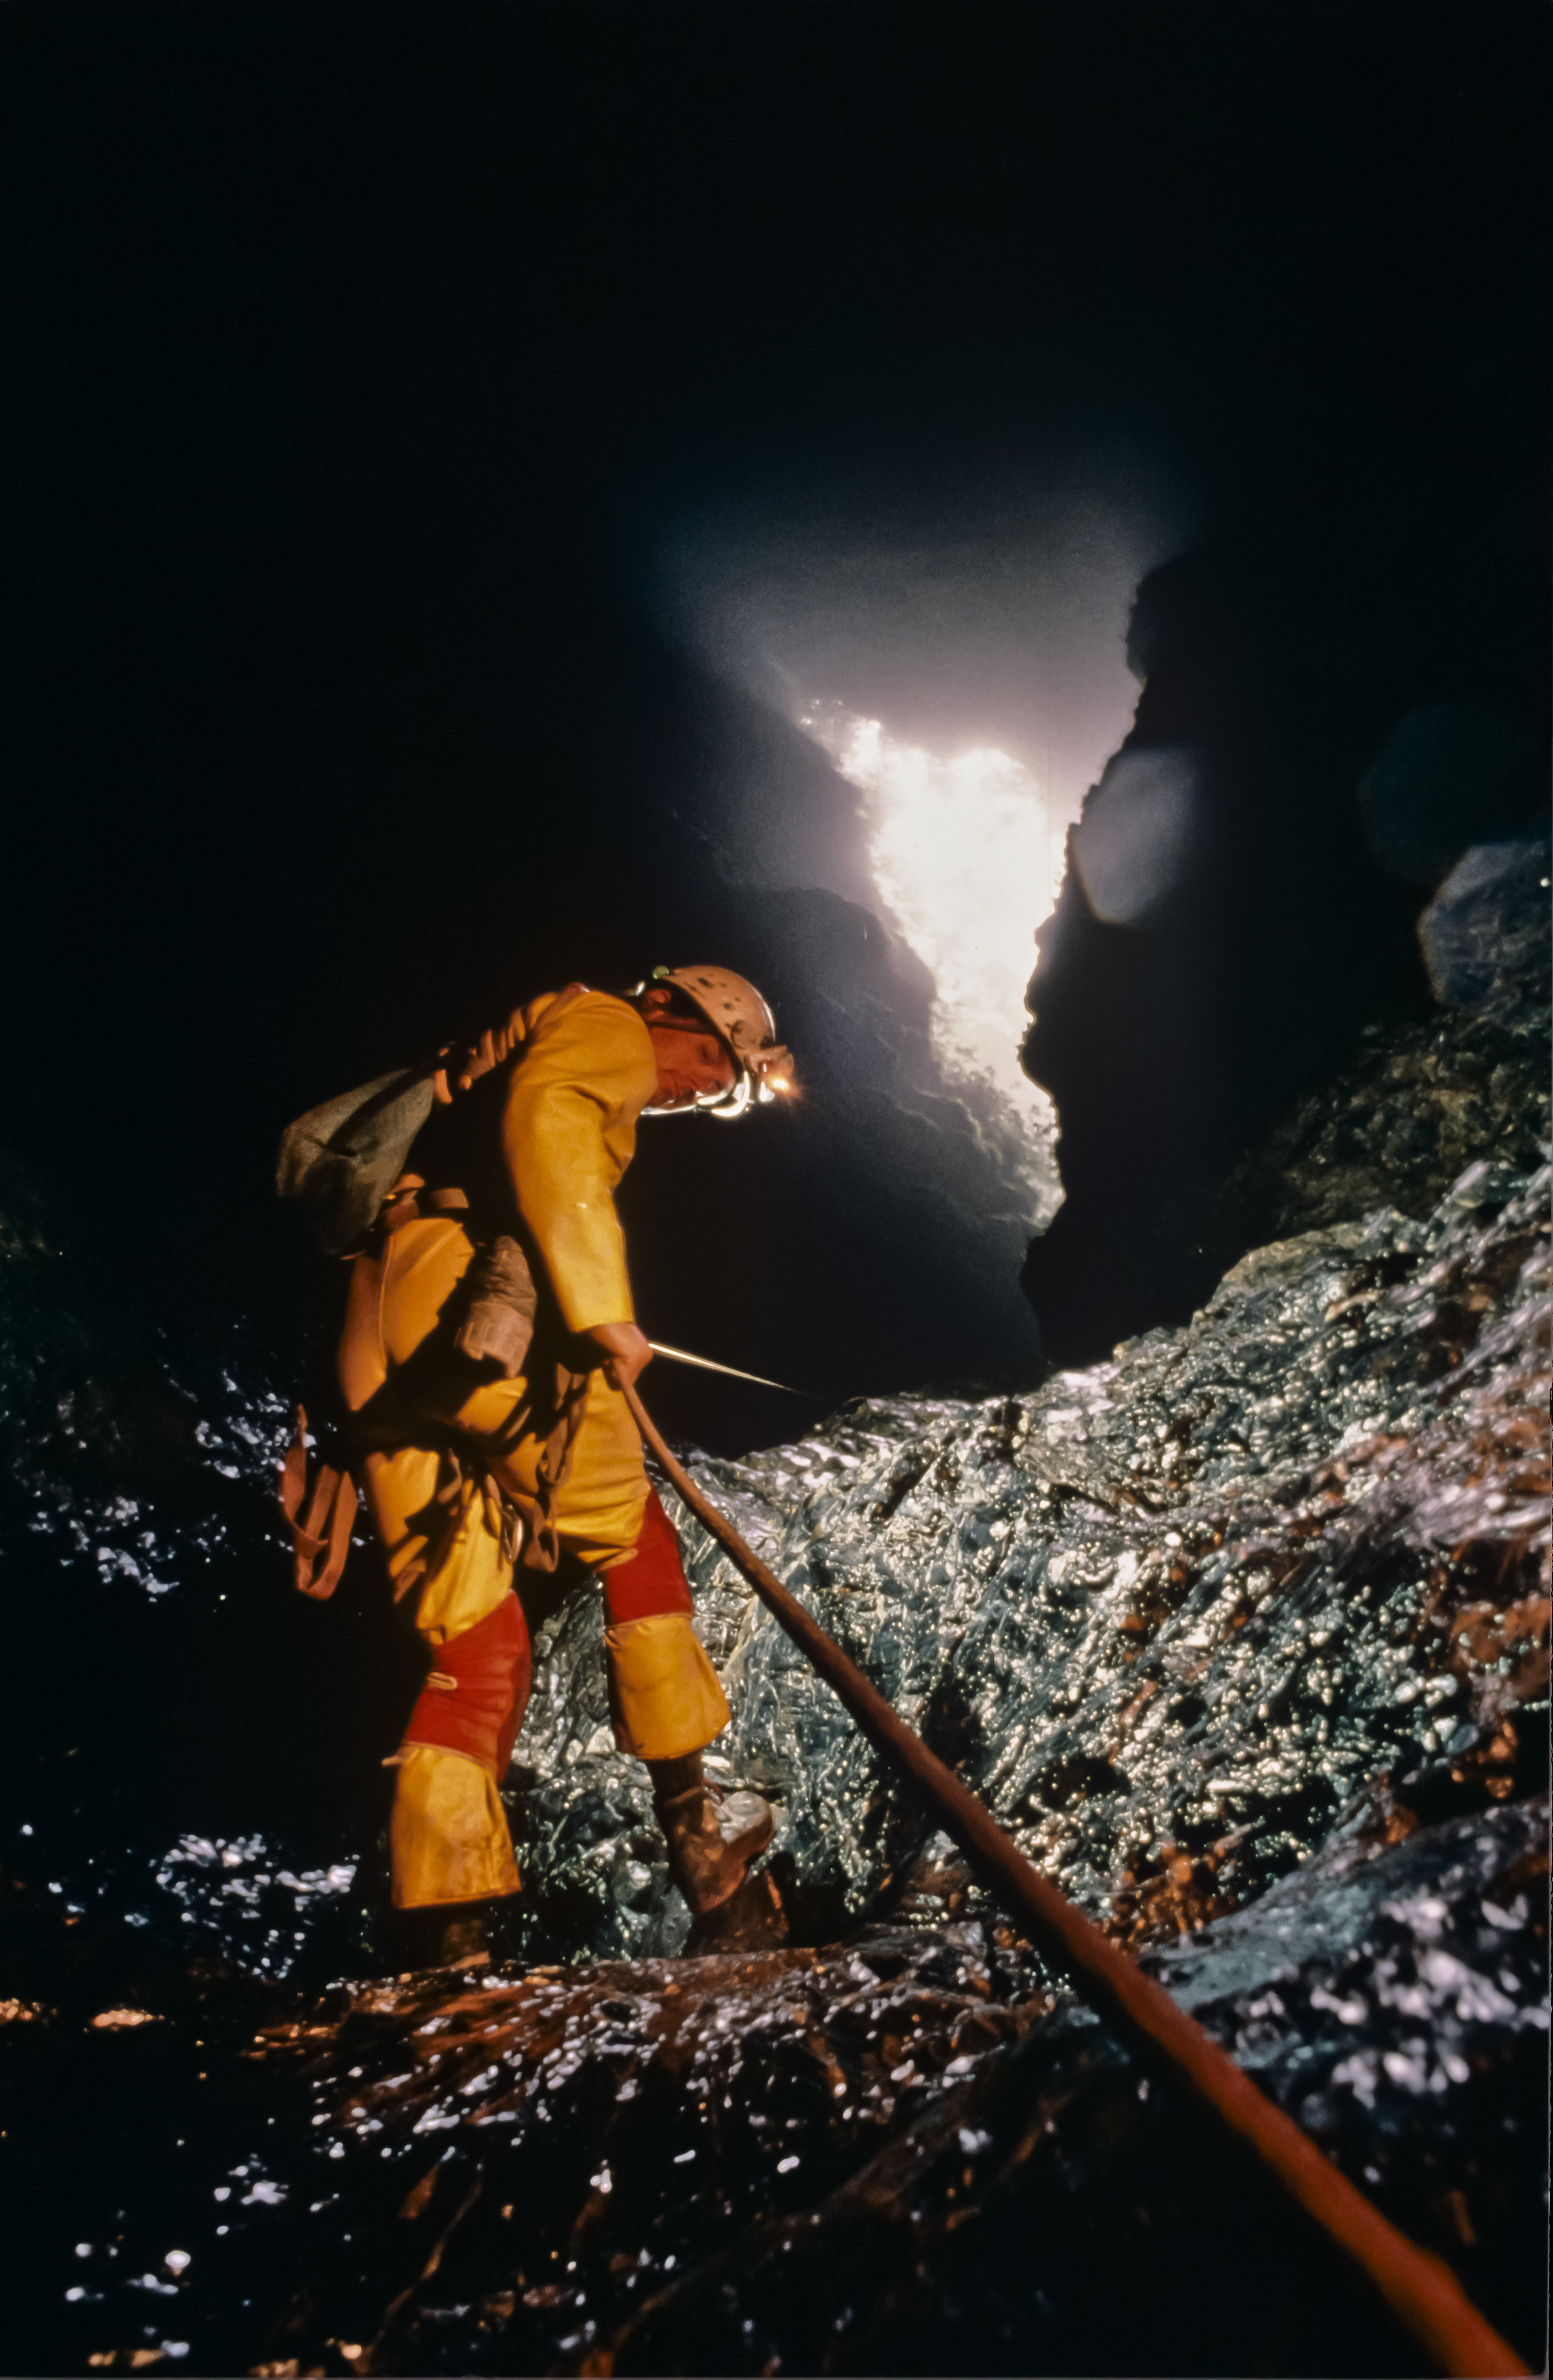  Jim Brown completes the descent of the "slip and slide" pitch. At 120m vertically below the surface the last bit of daylight is visible before beginning the long trip down. Photo by U. S. Deep Caving Team/Wes Skiles. 